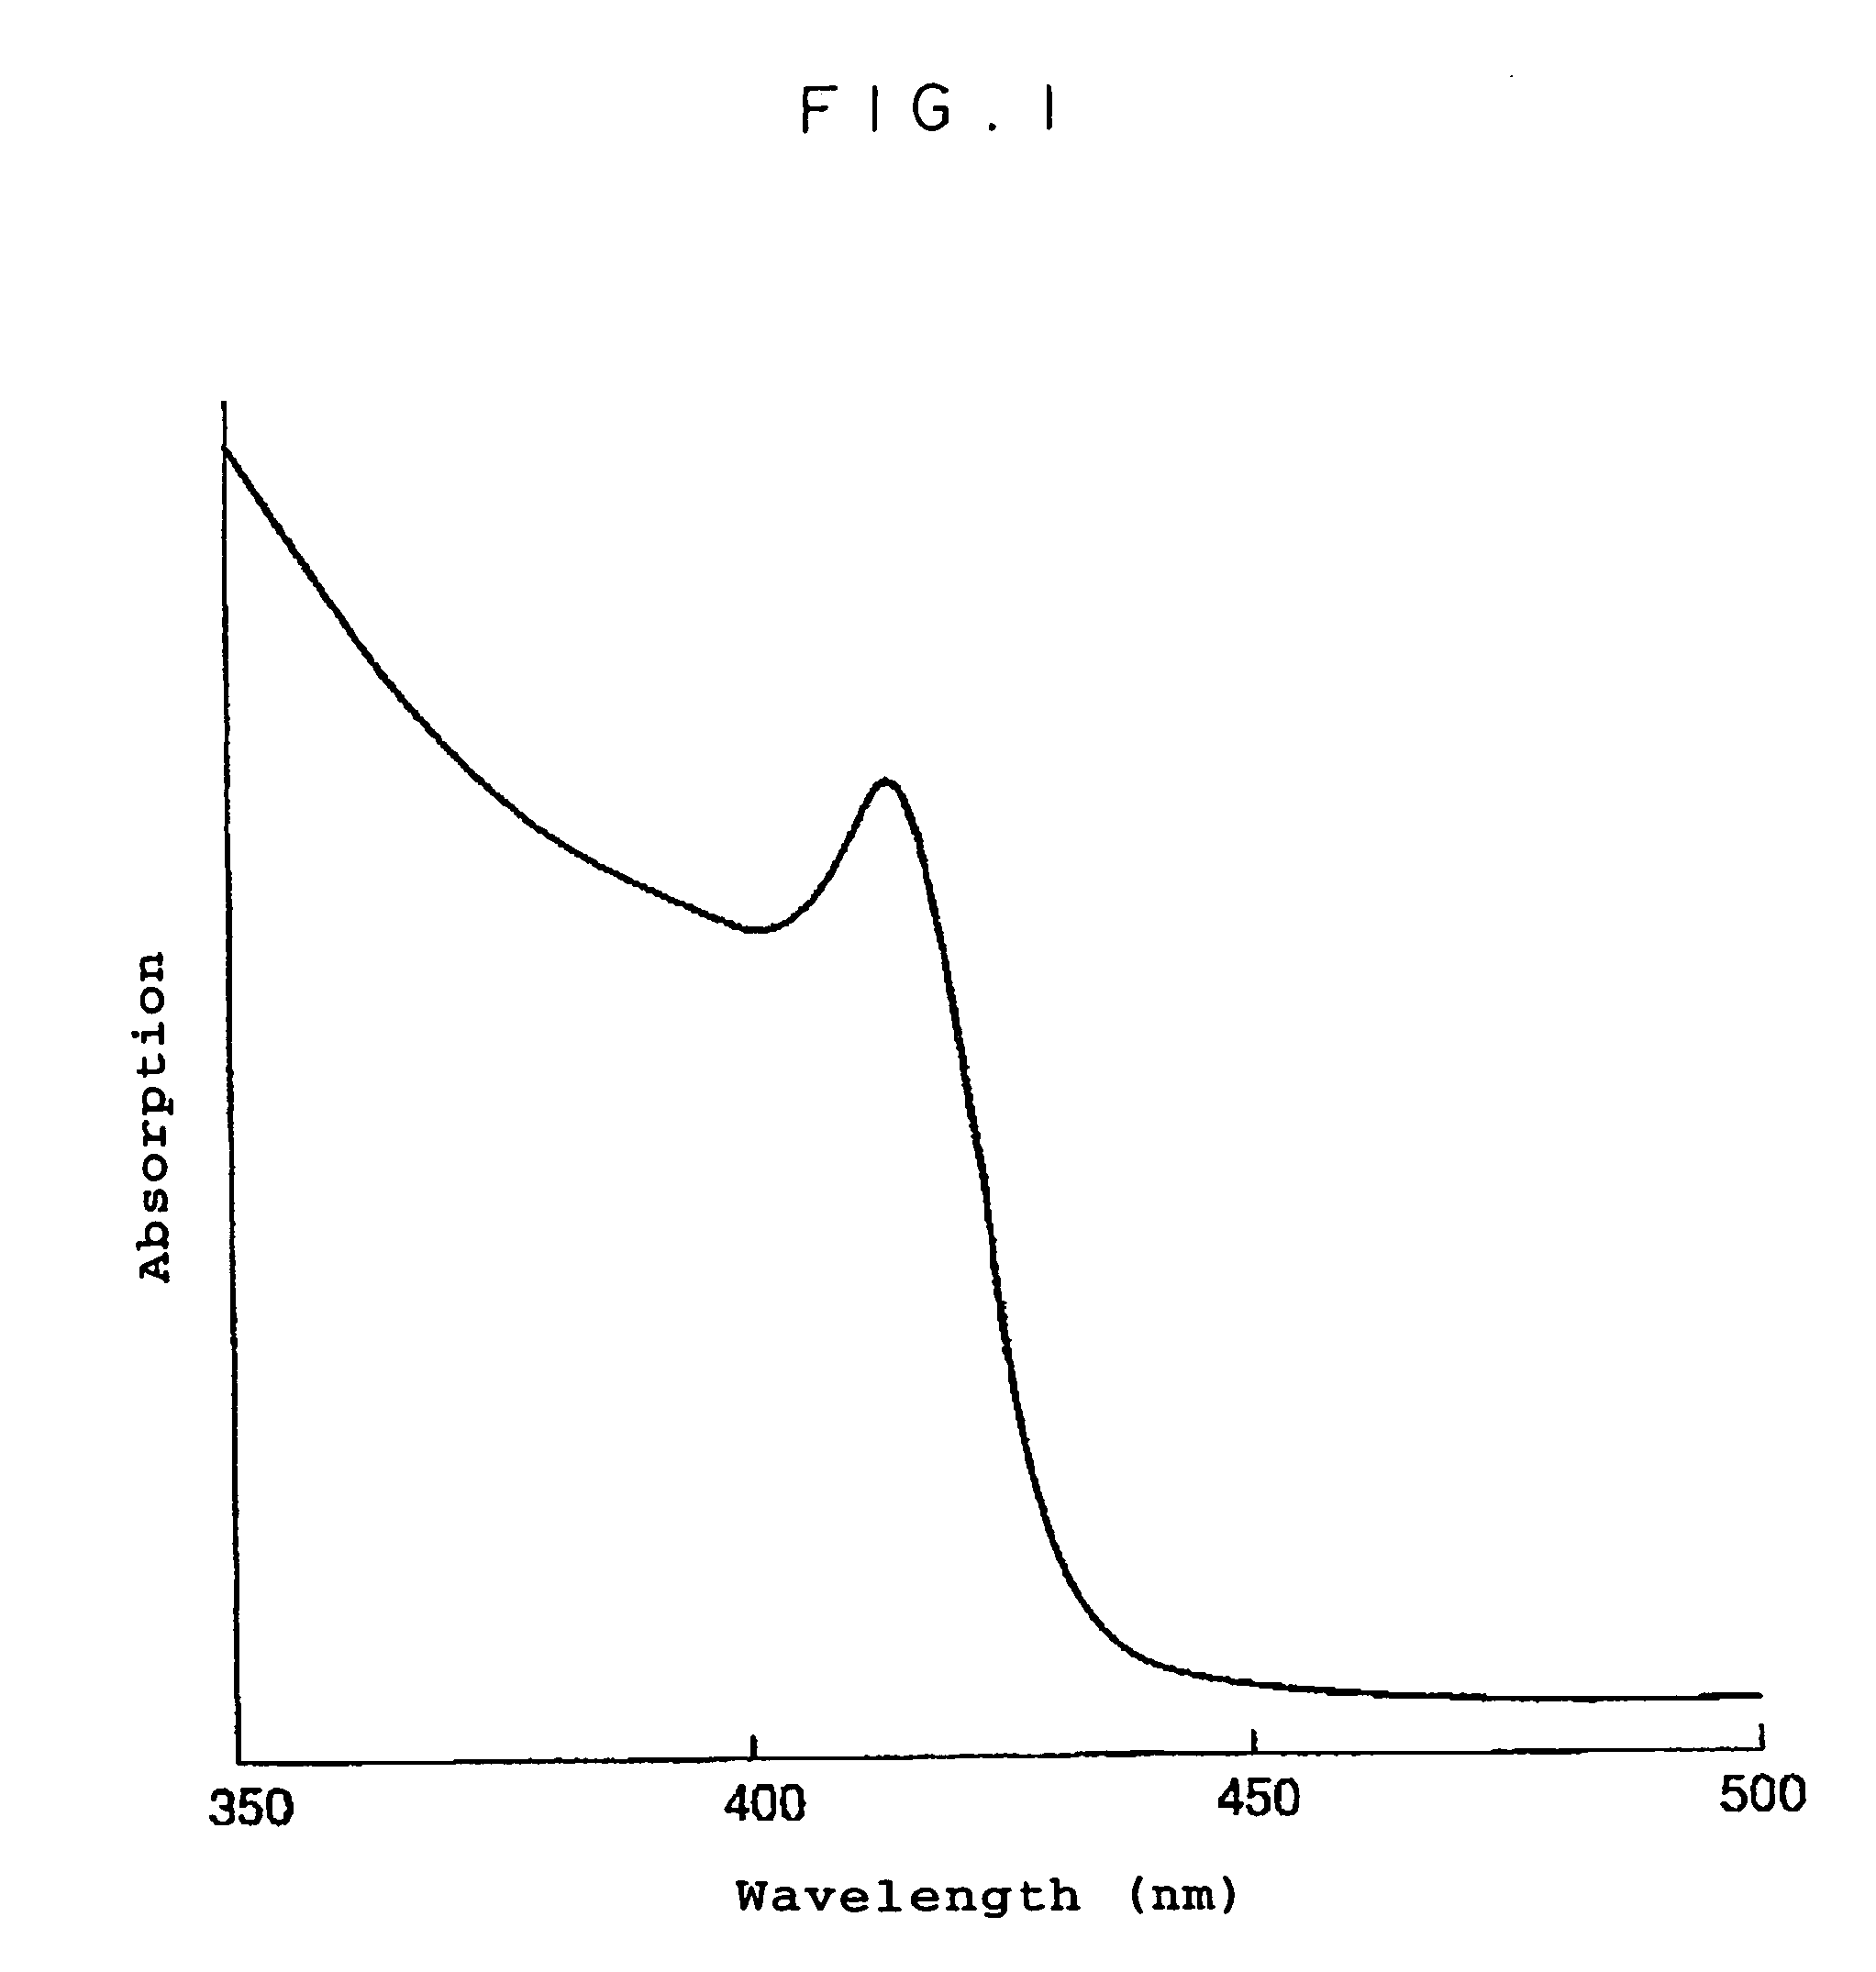 Image forming method using photothermographic material